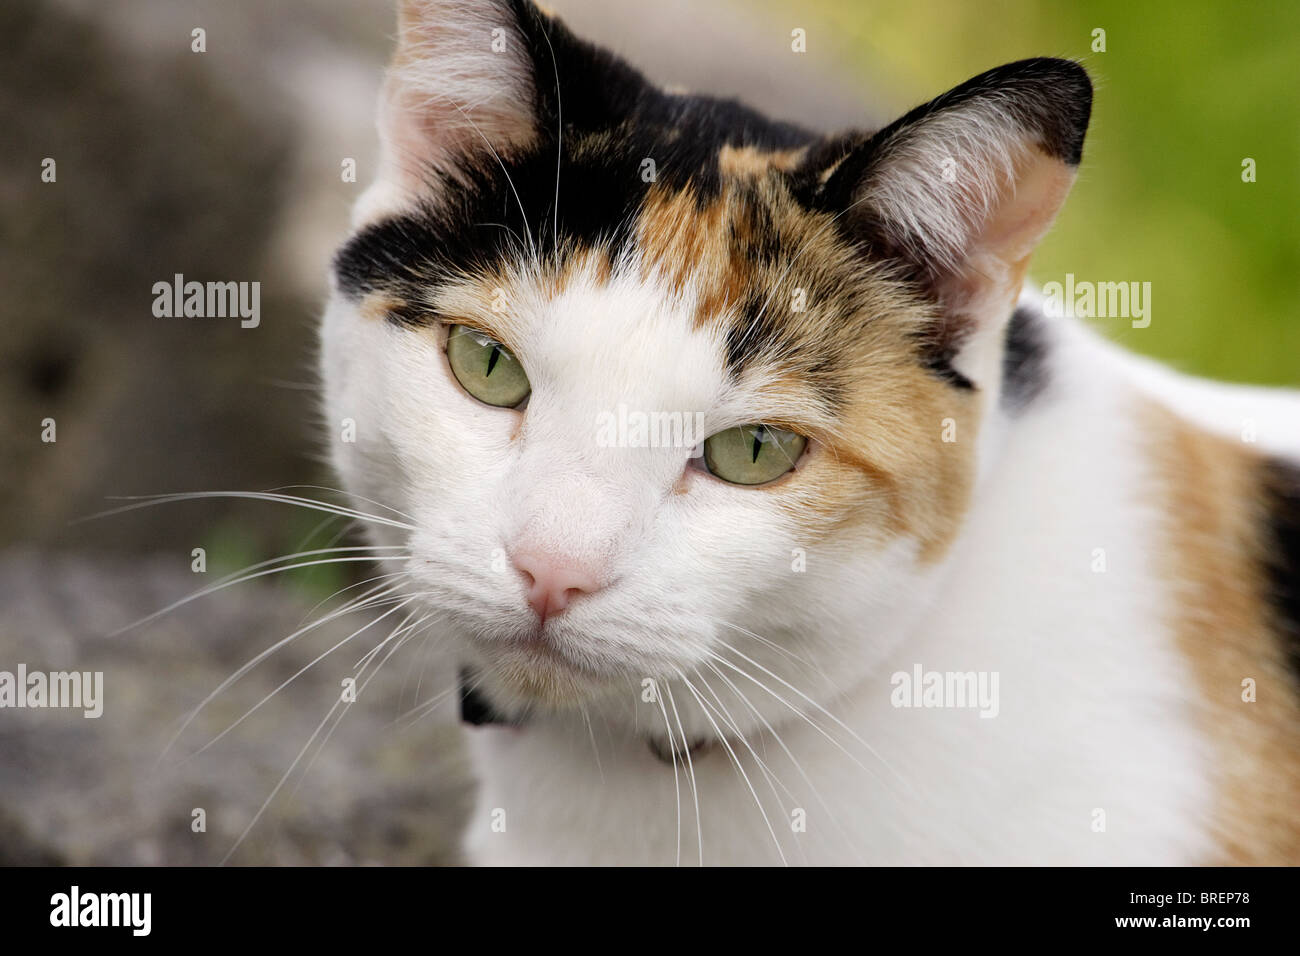 portrait of a white and marmalade cat Stock Photo